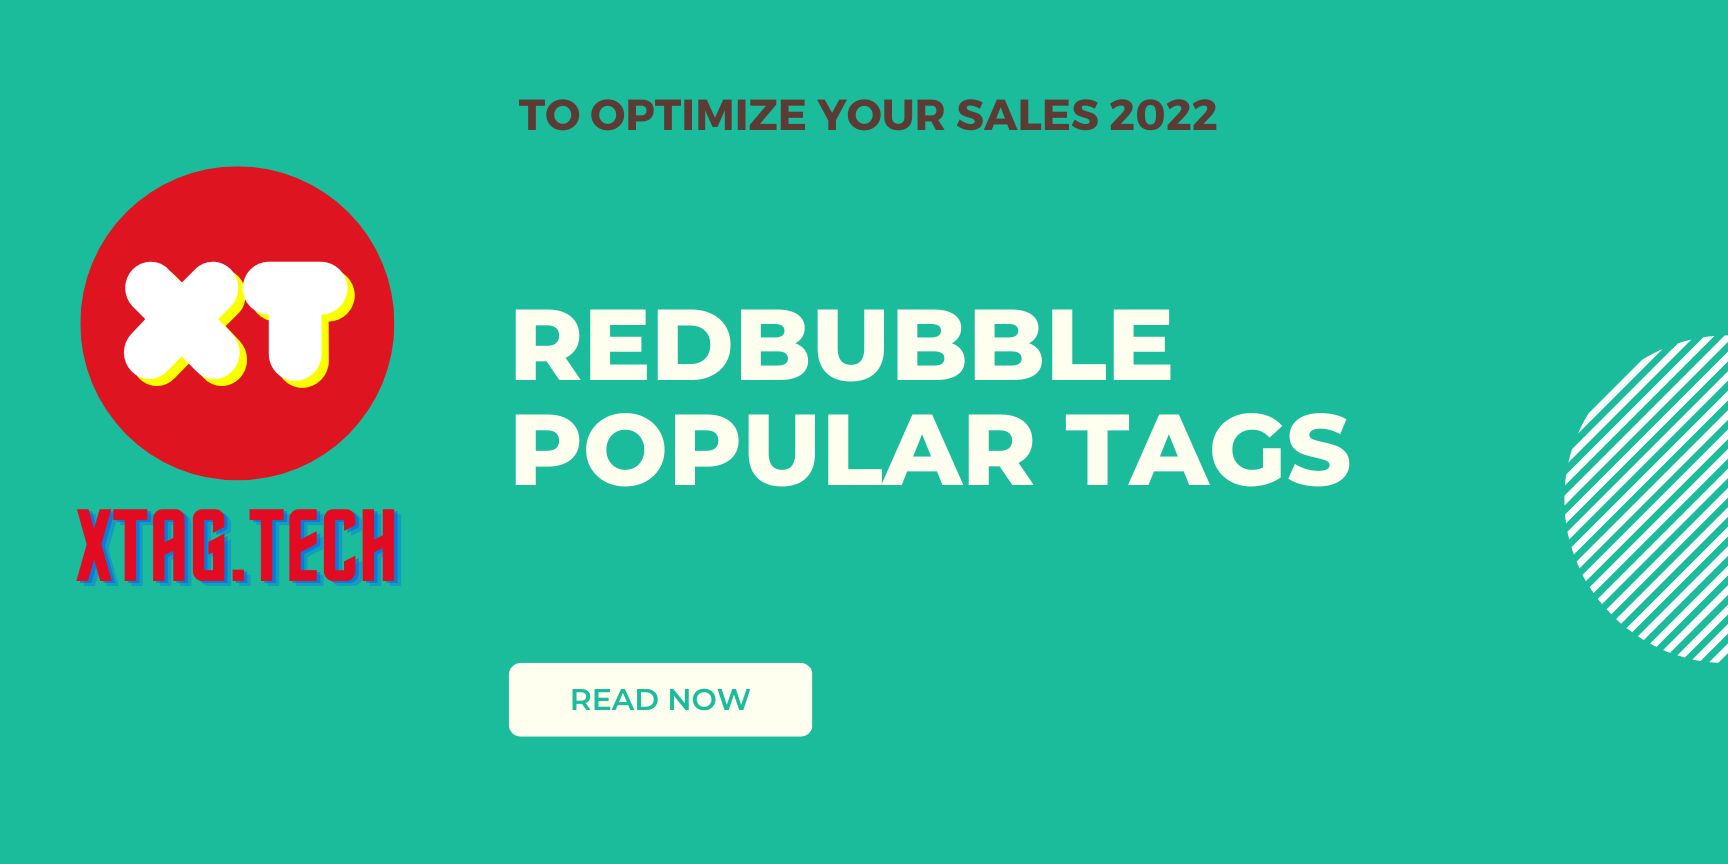 How to Find Redbubble Popular Tags to Optimize Your Sales 2022